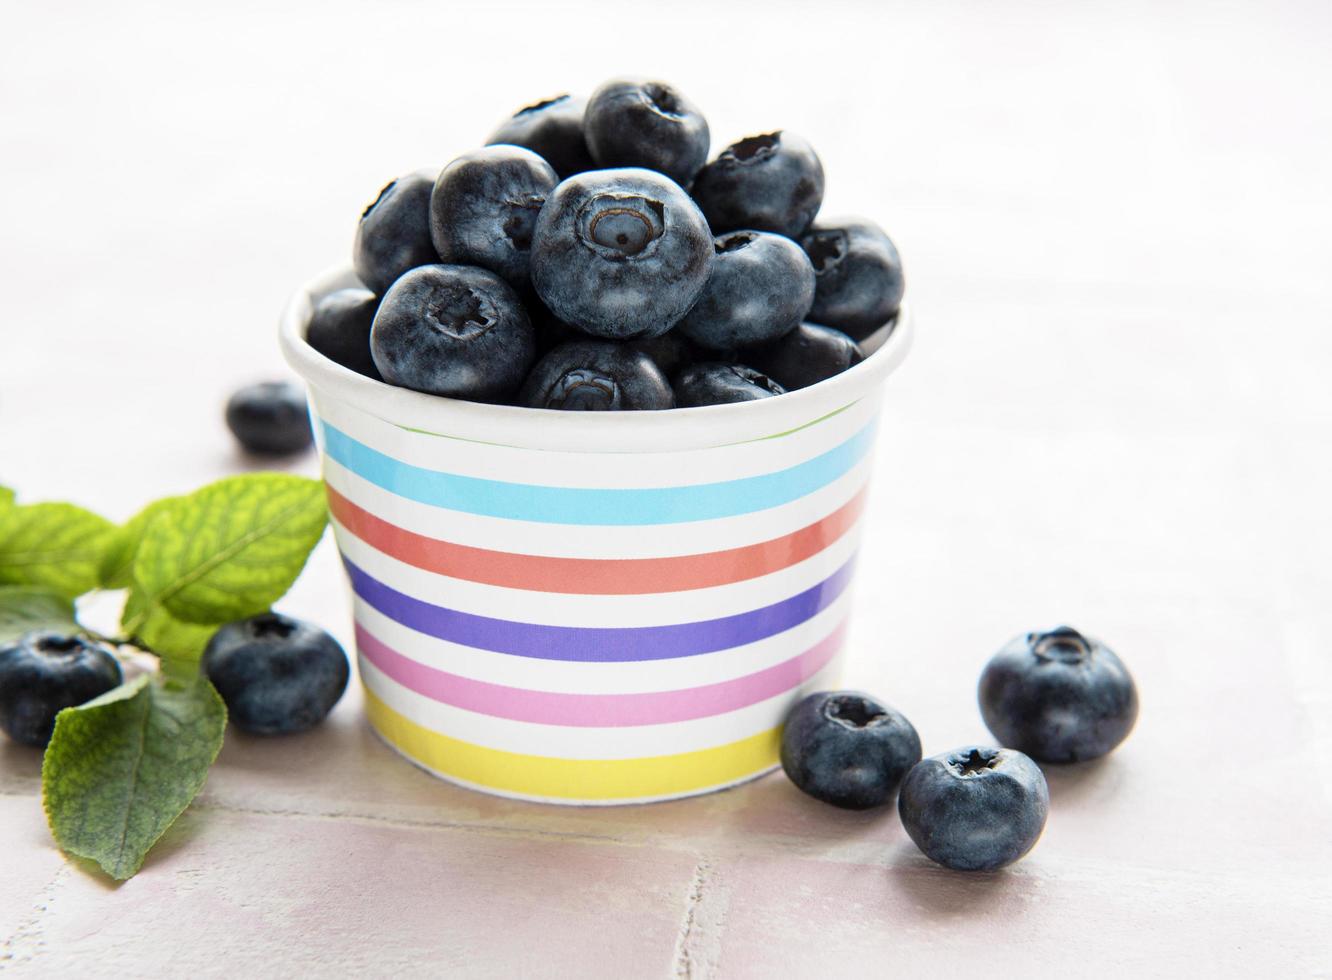 Blueberries on tile background photo